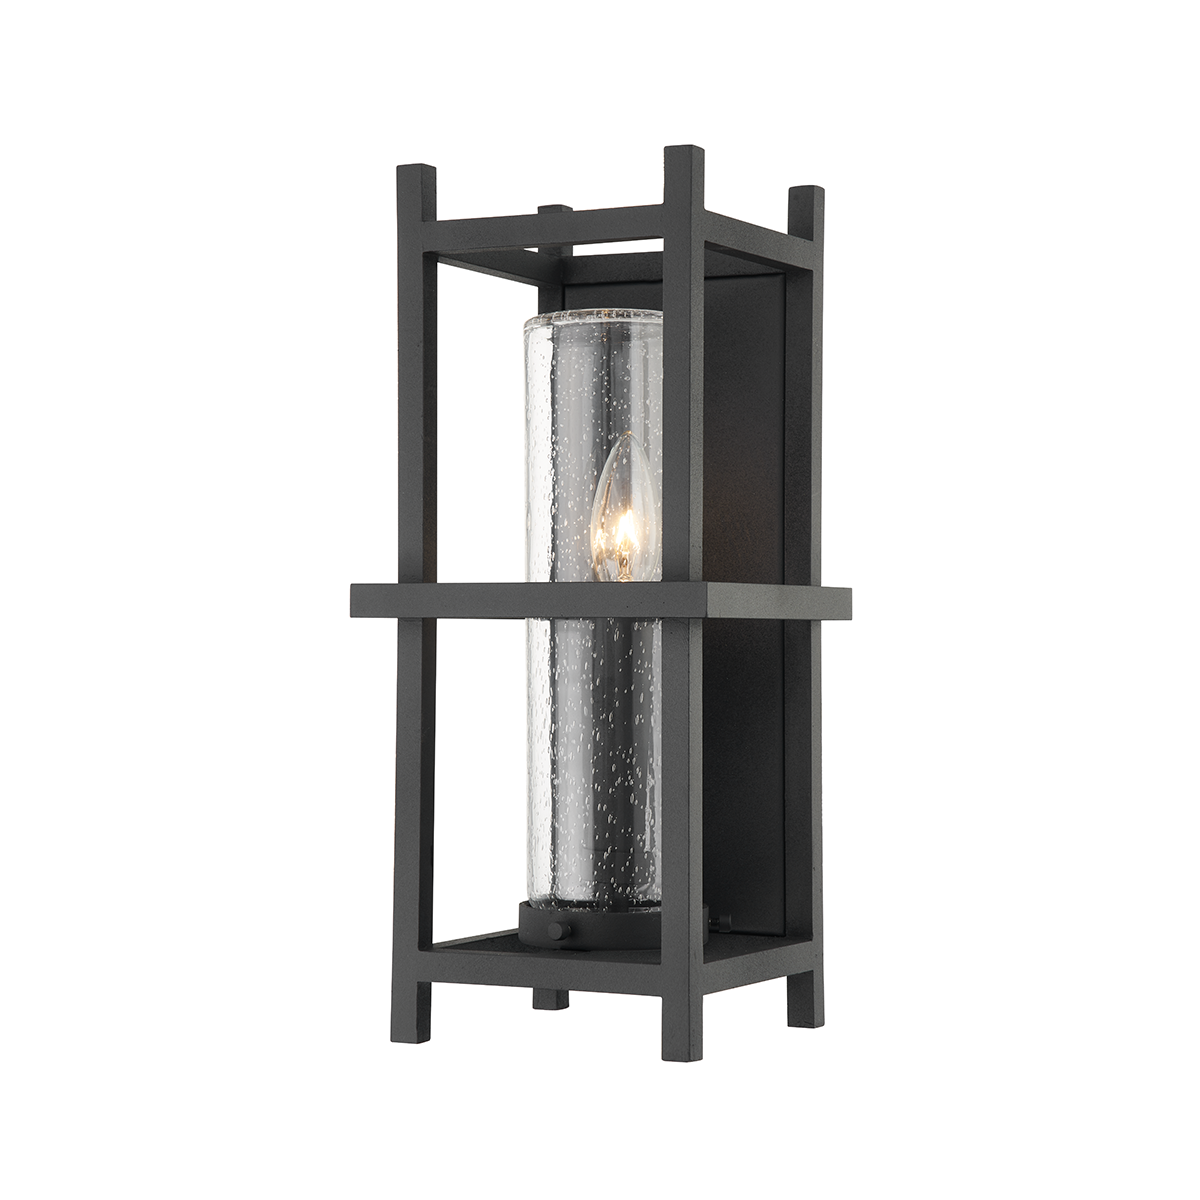 Troy Lighting Carlo Wall Sconce Wall Sconce Troy Lighting TEXTURED BLACK 6.75x6.75x14.75 